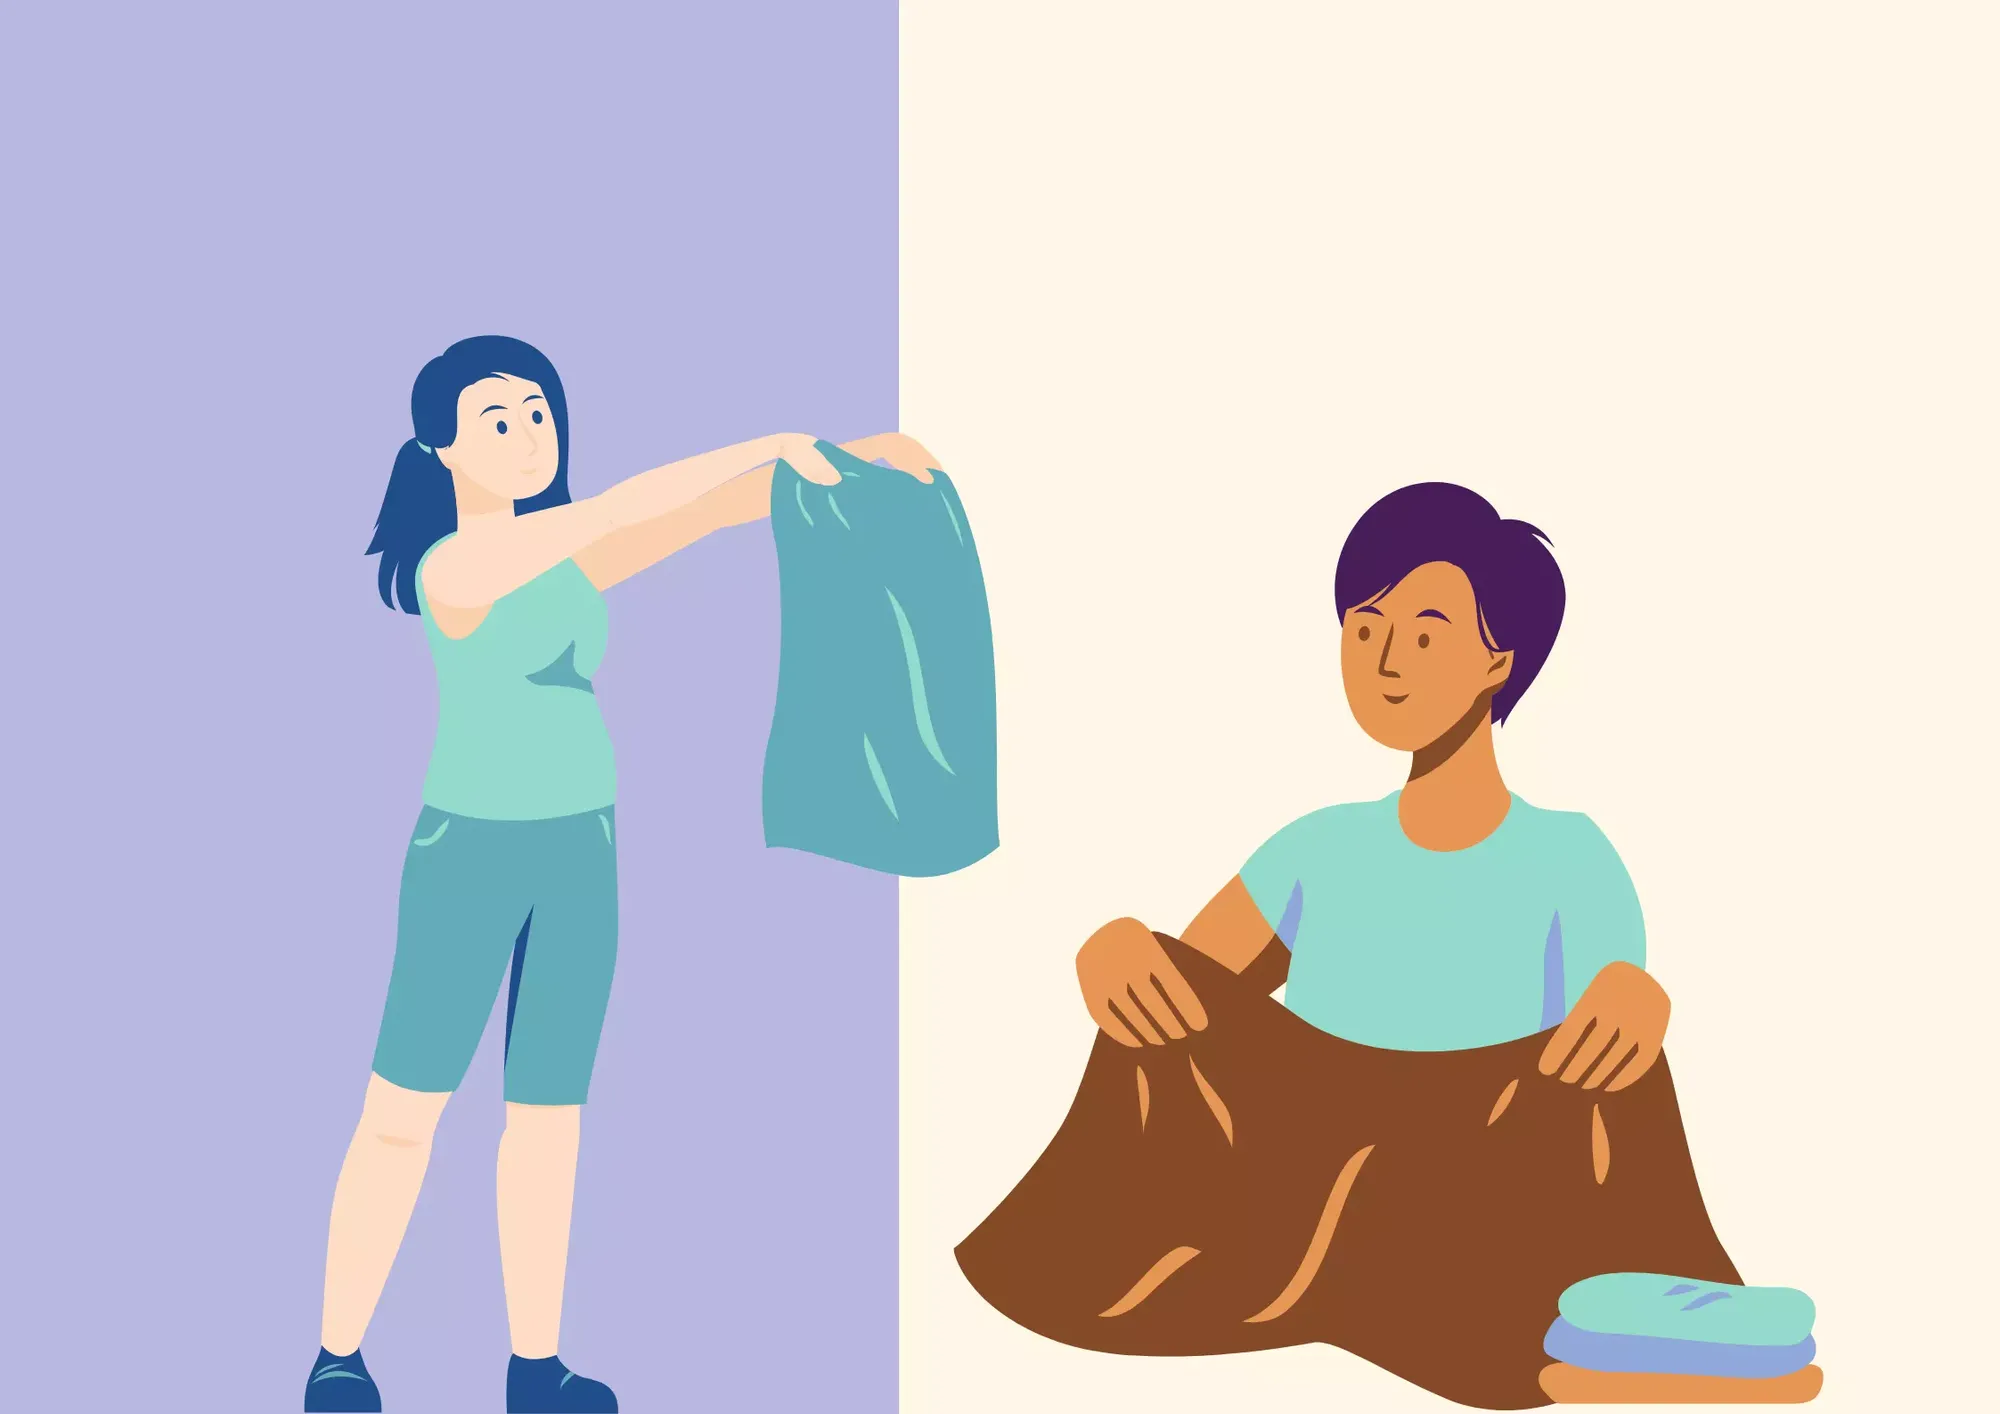 people holding clothes (illustration)